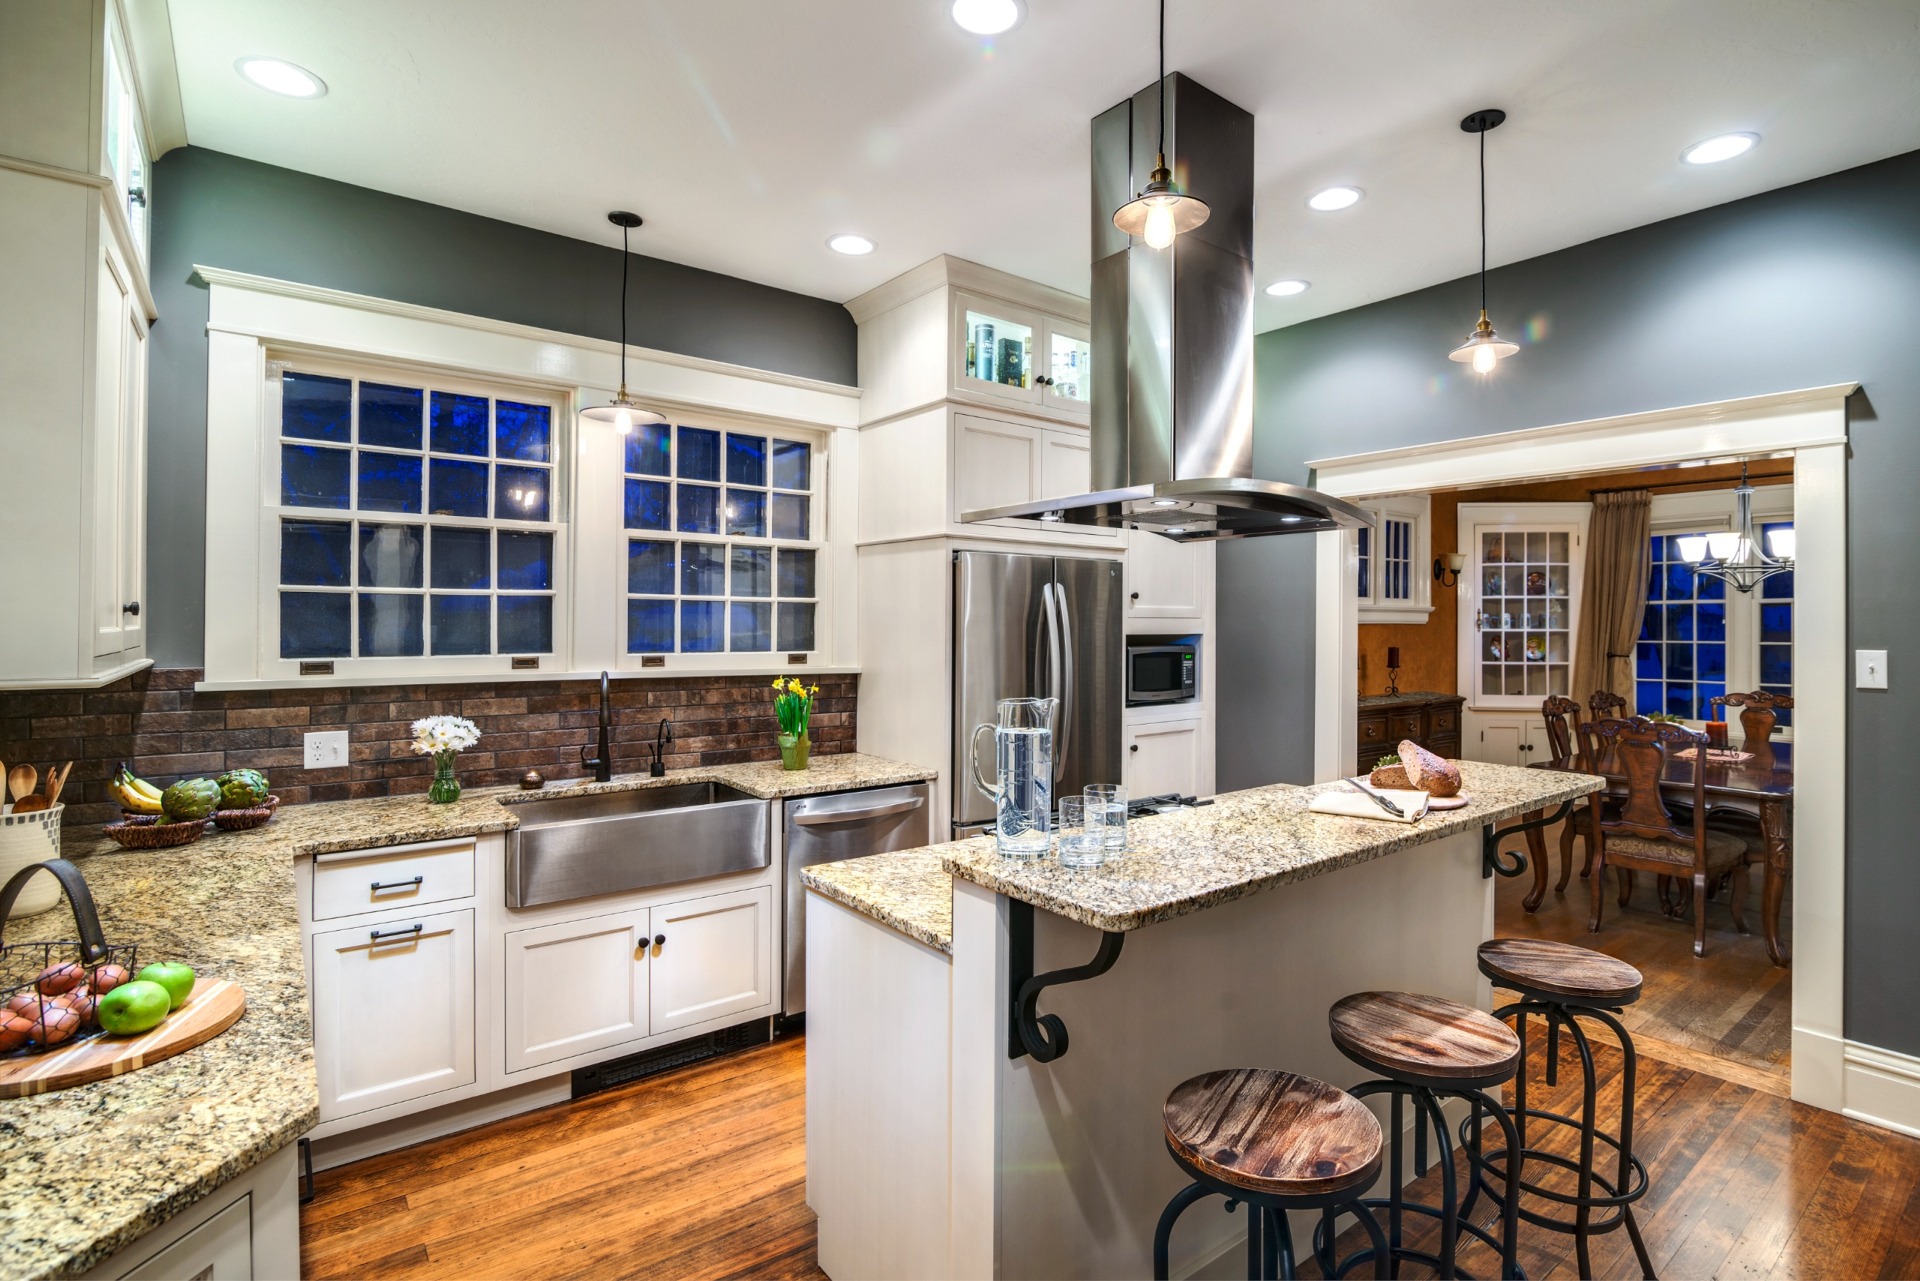 A kitchen remodeled by Livingston Home Outfitters